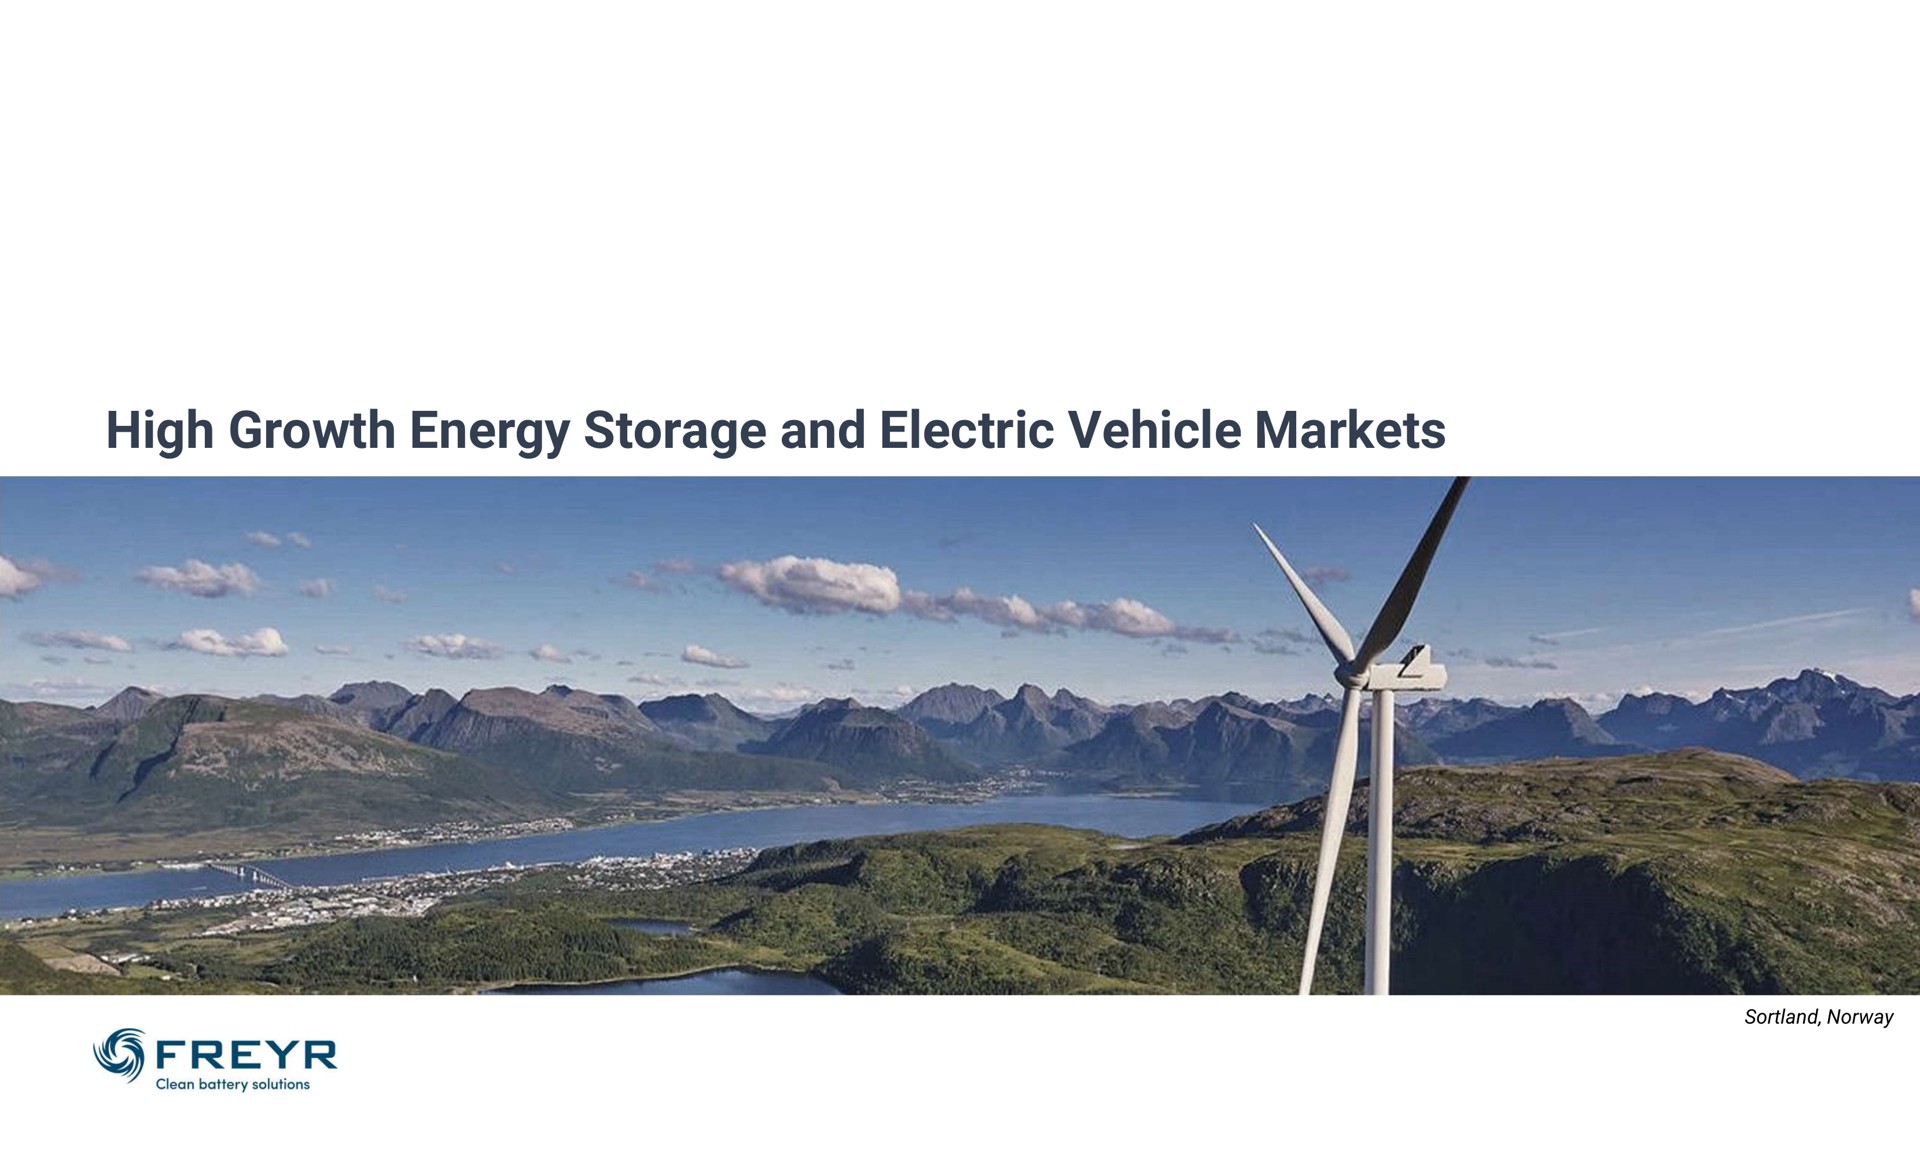 high growth energy storage and electric vehicle markets | Freyr